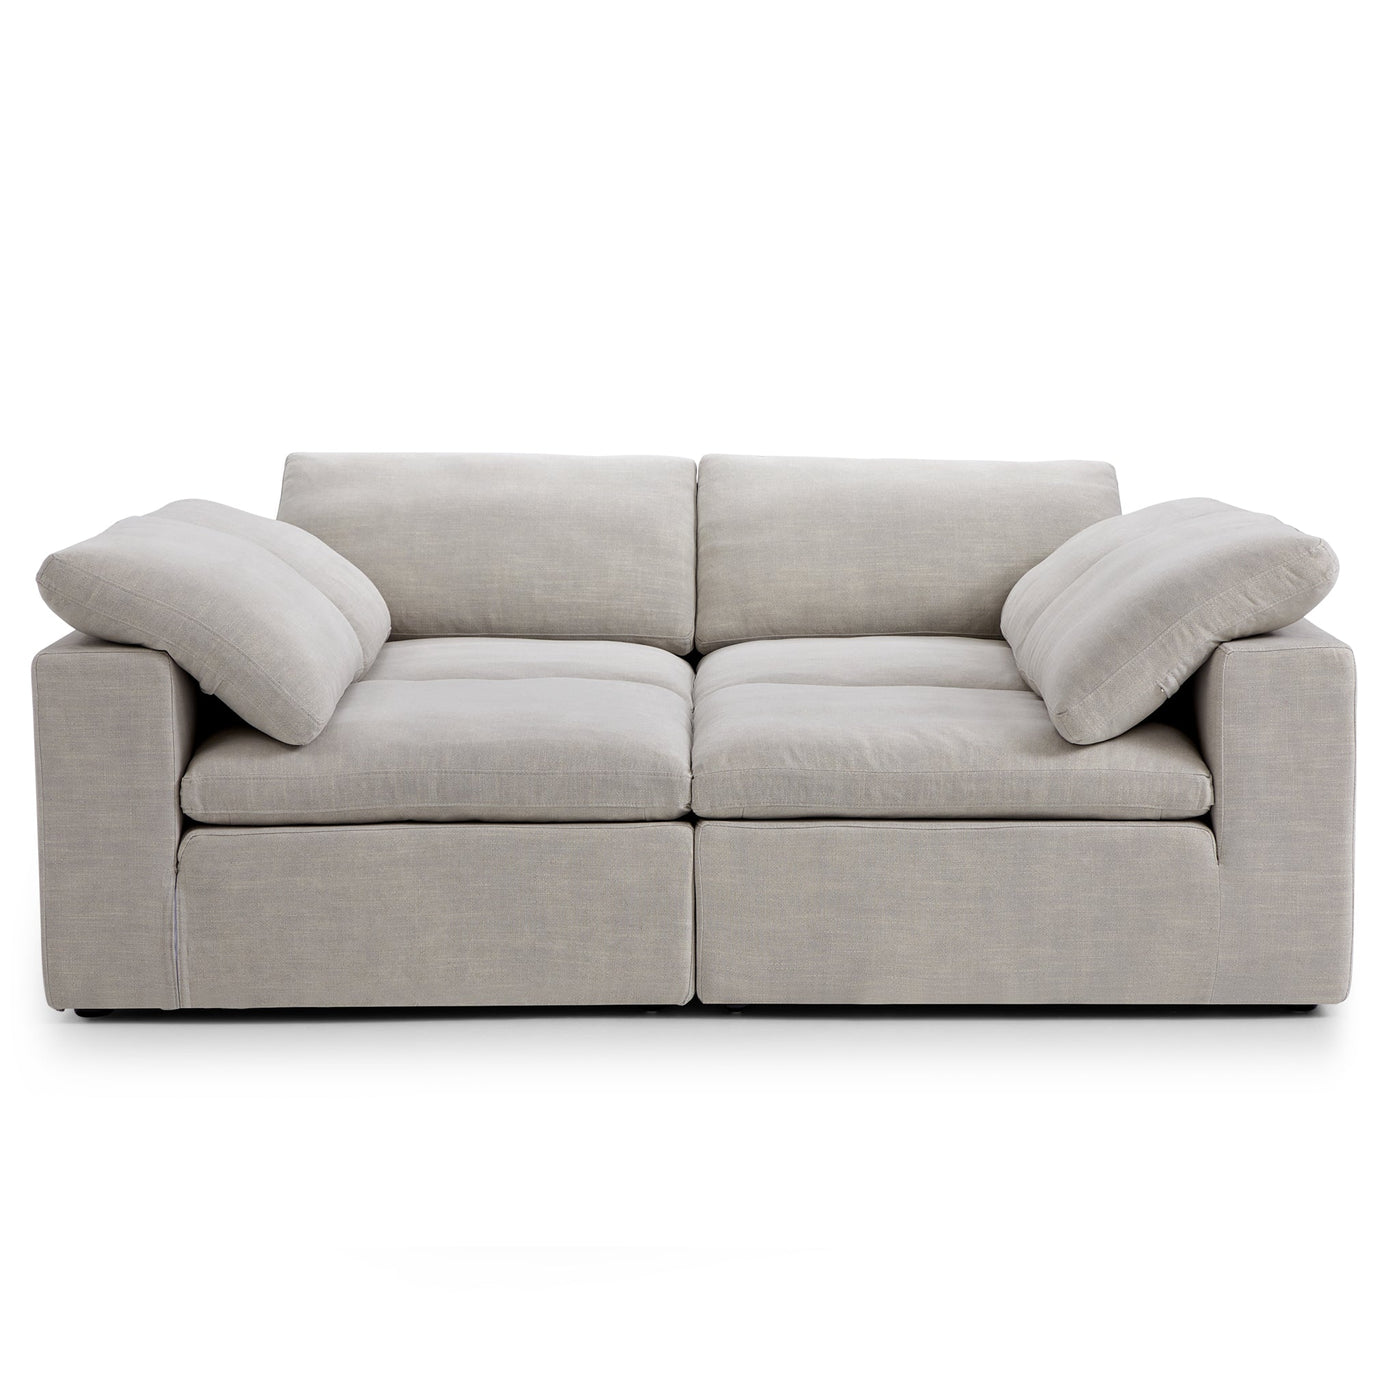 Tender Wabi Sabi Light Gray U Shaped Sectional with Open Ends-Sand-90.6"